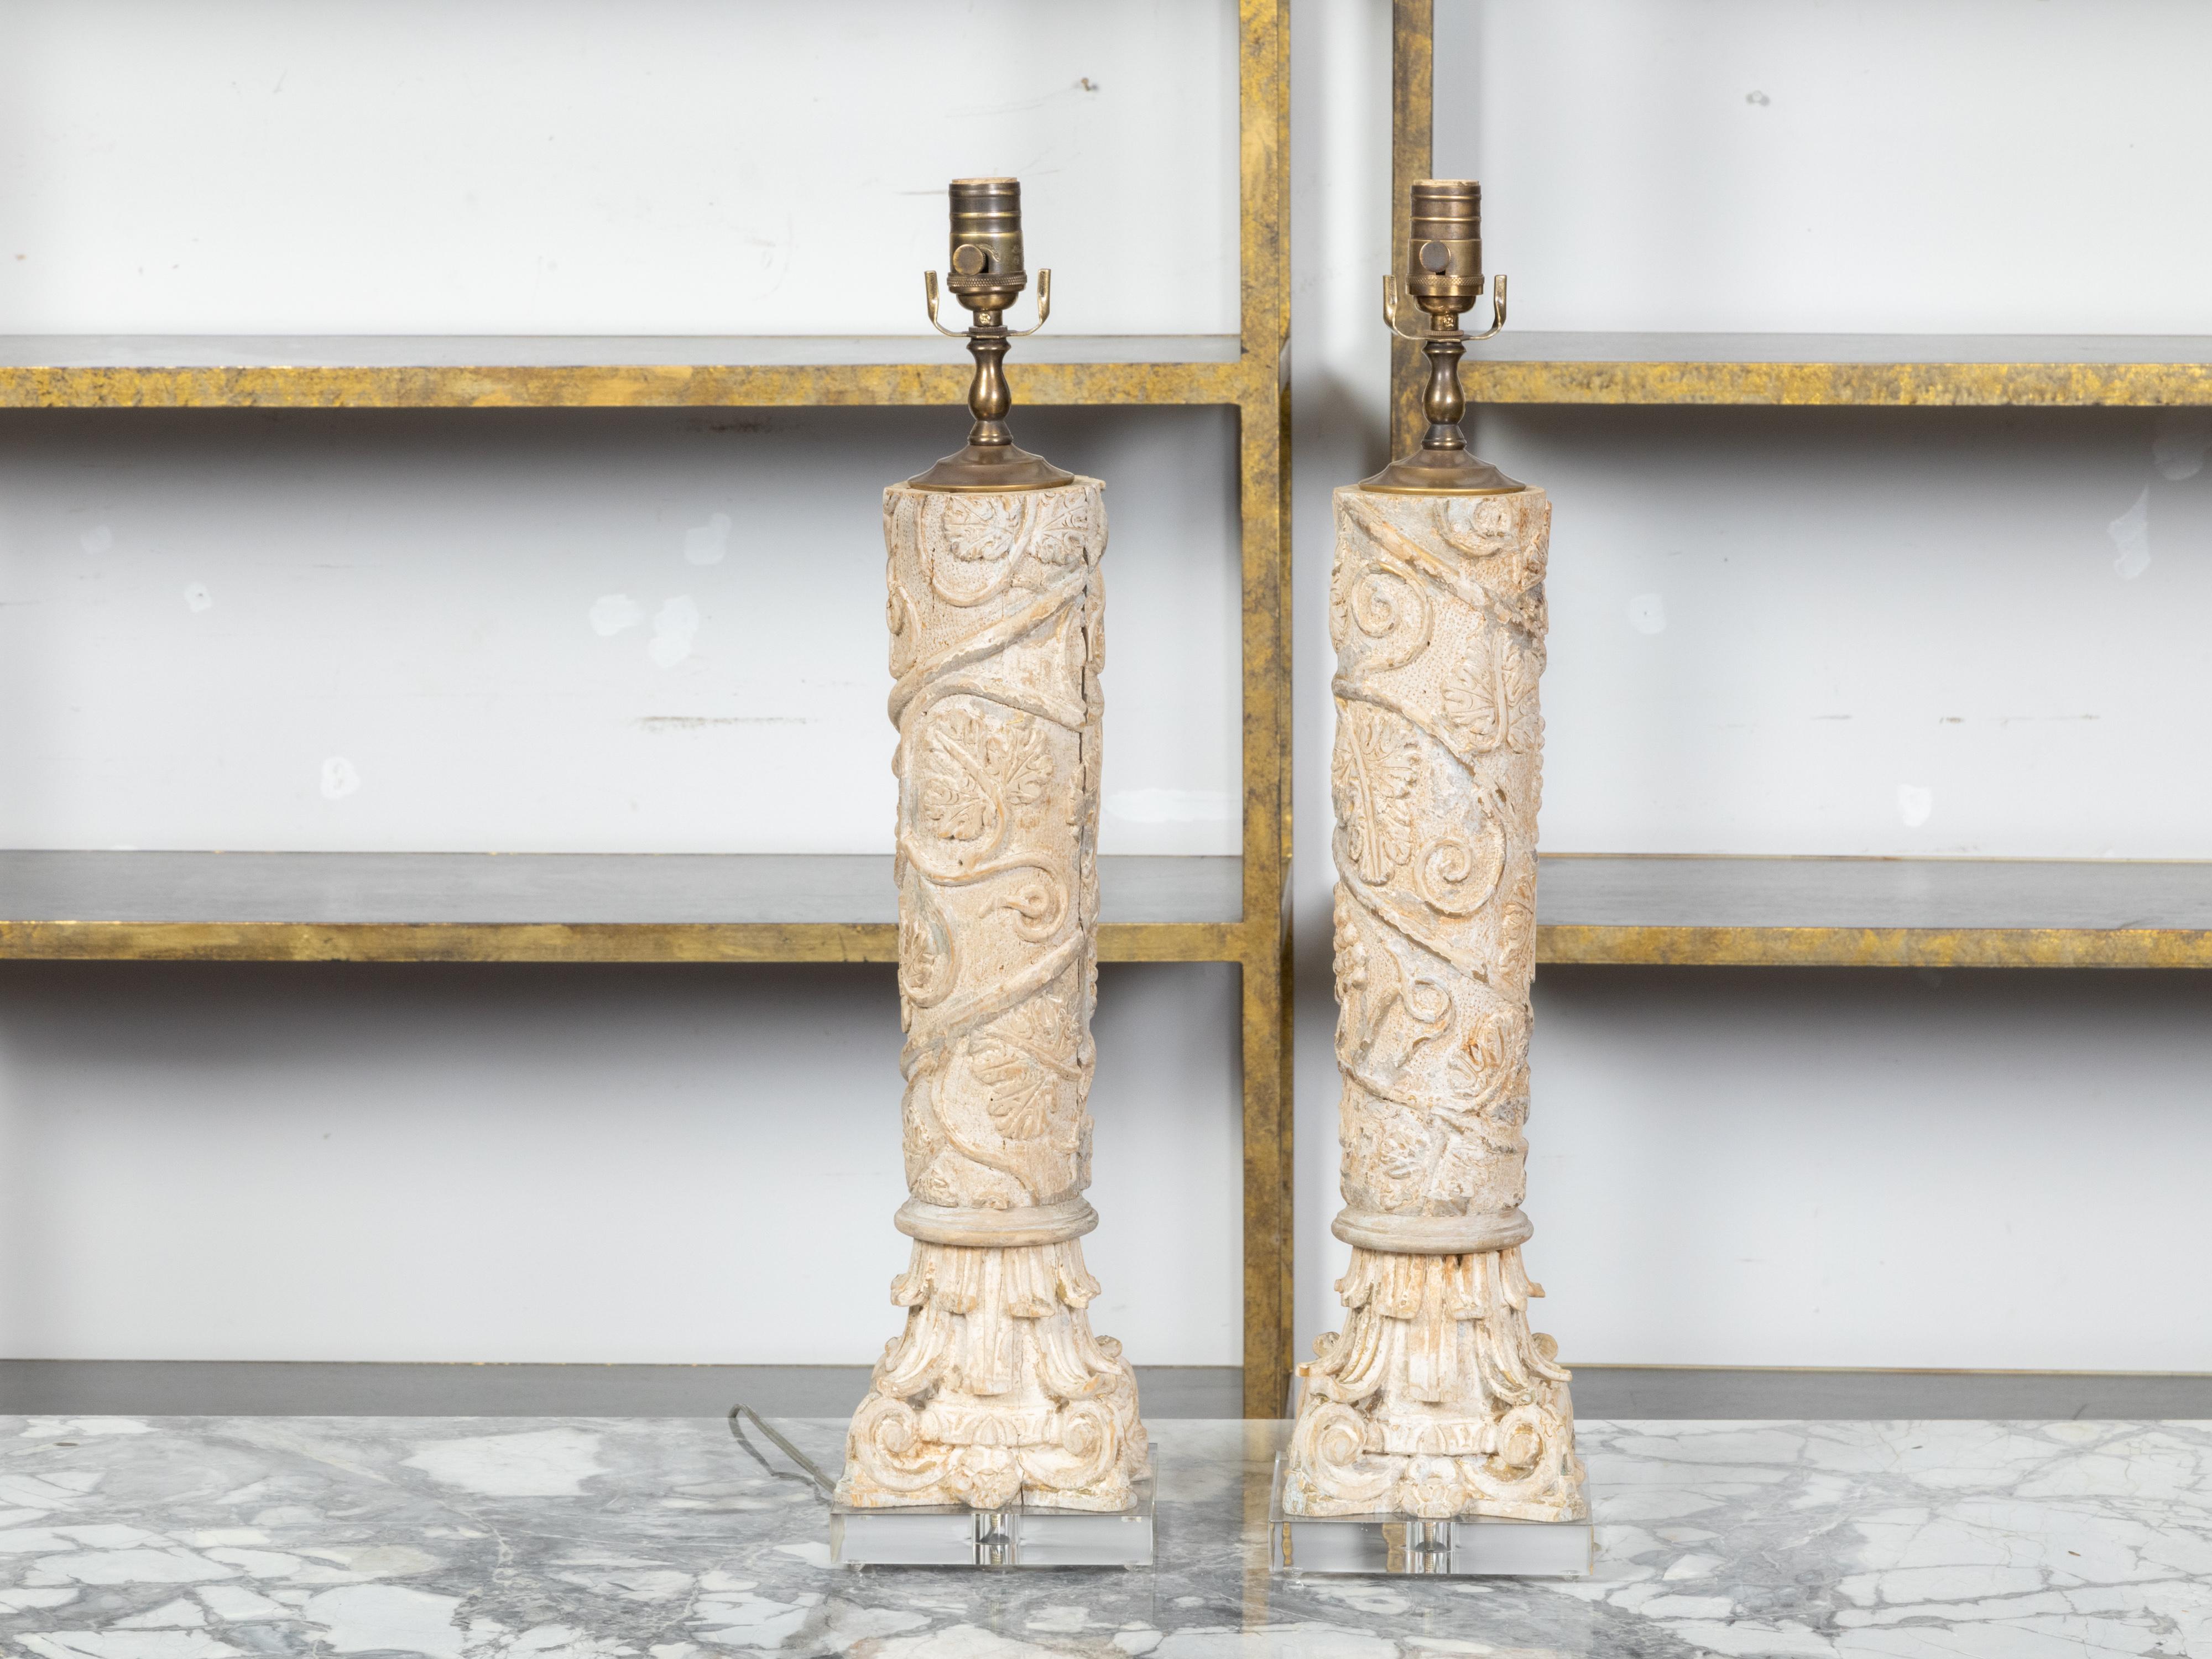 A pair of Italian Classical style carved and painted wooden column fragments from the 19th century depicting spiraling foliage and Corinthian style base, transformed into modern table lamps mounted on lucite bases. Created in Italy during the 19th